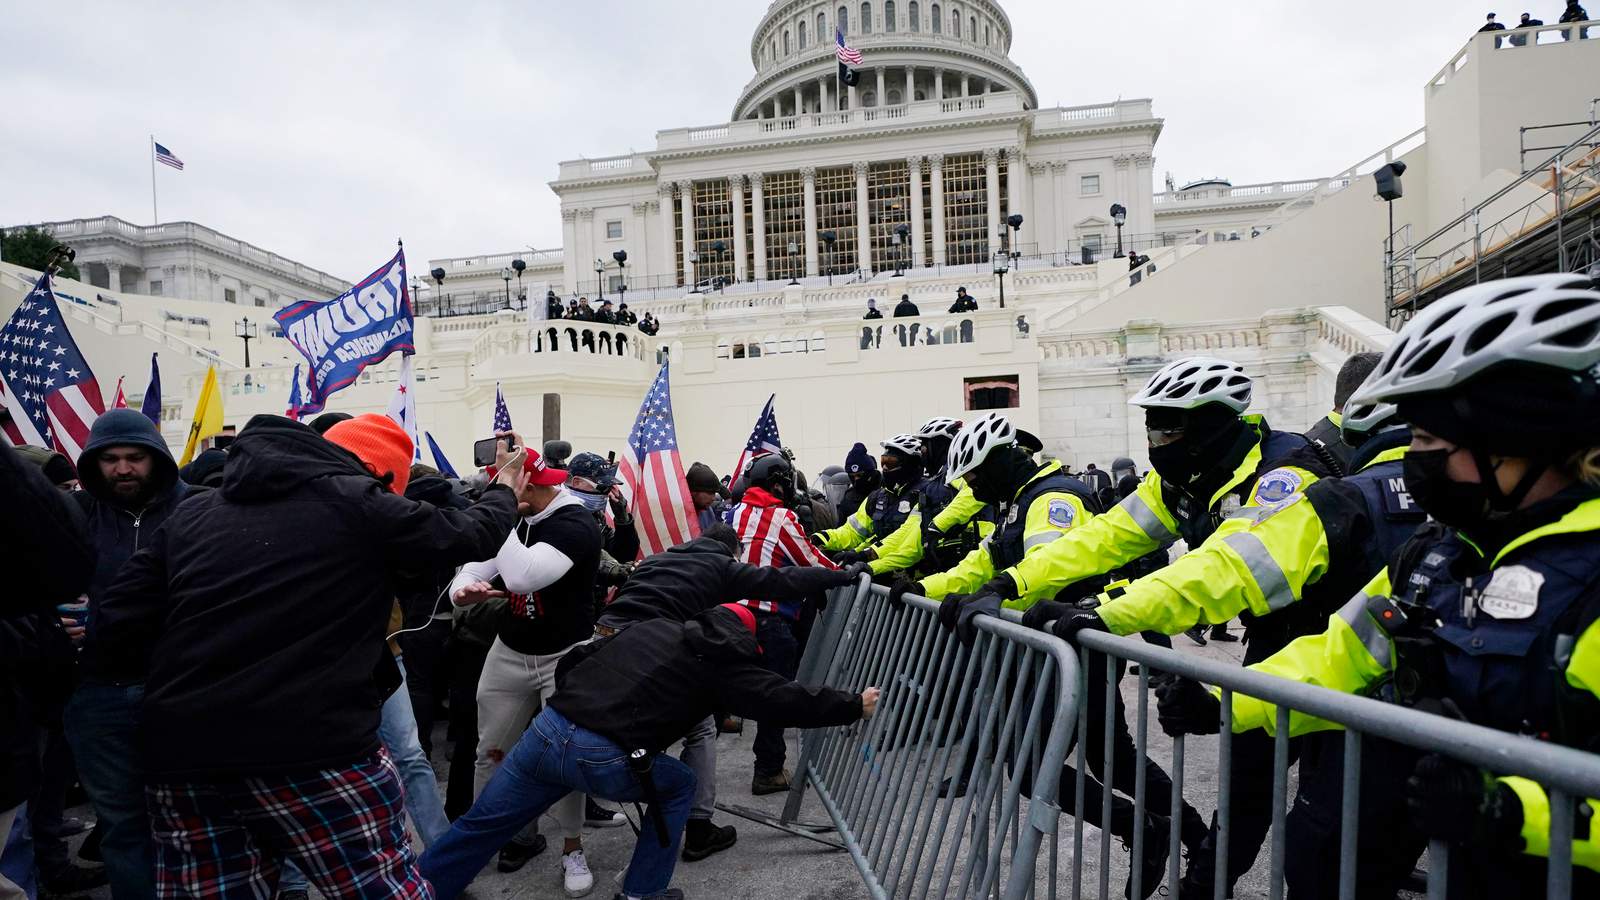 WATCH: President Donald Trump’s supporters clash with police in march toward Capitol building